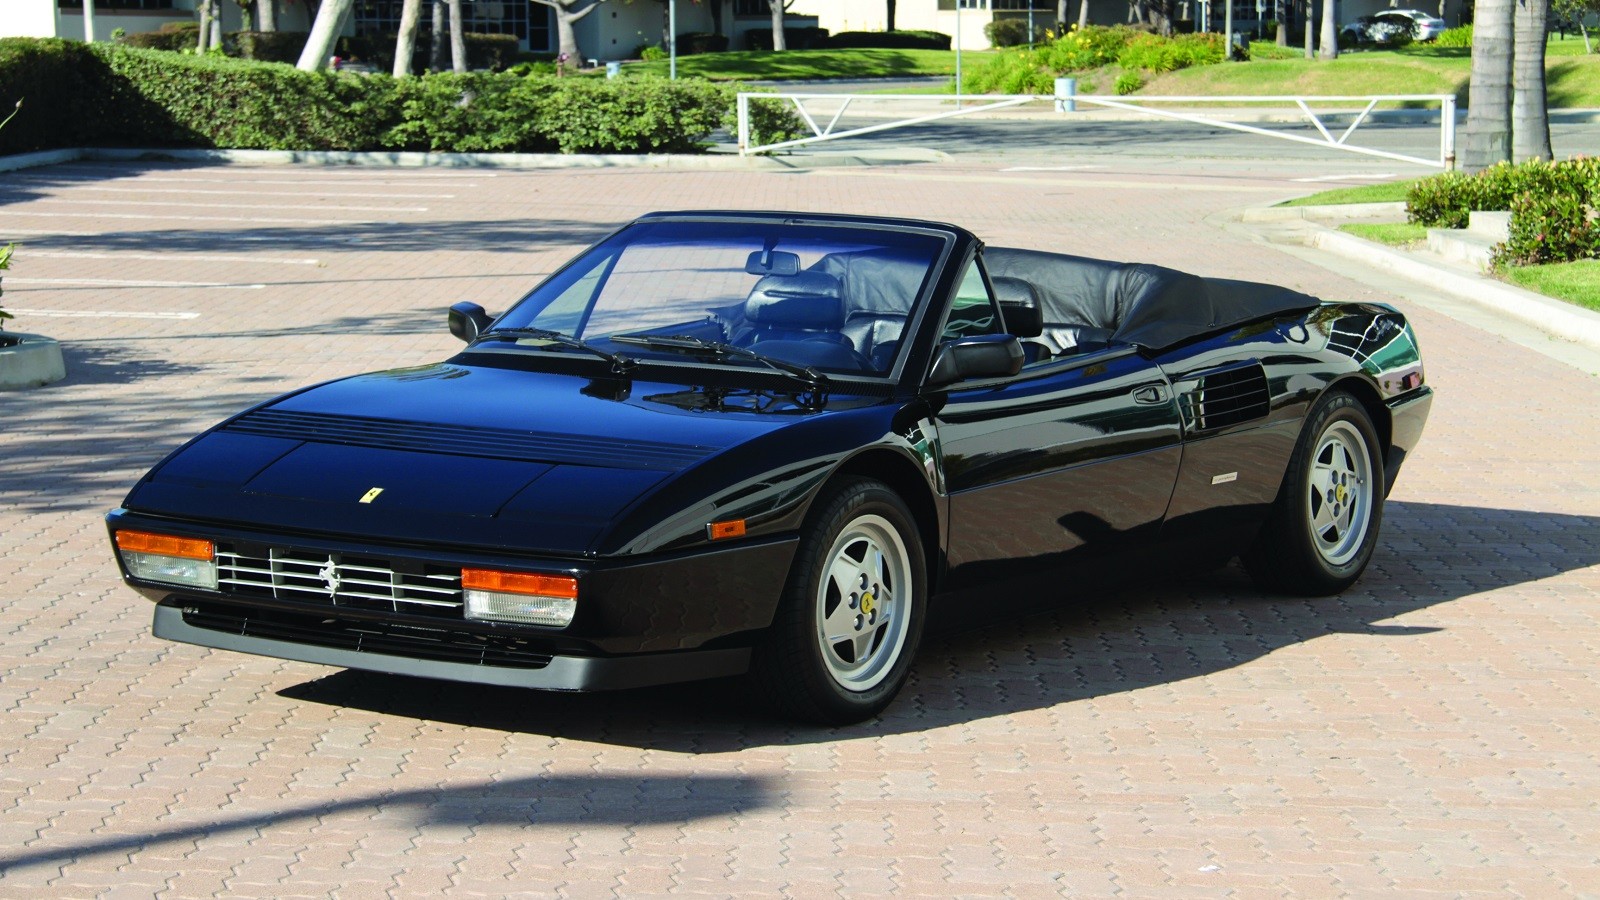 20 fastest cars of the ’80s | Classic & Sports Car